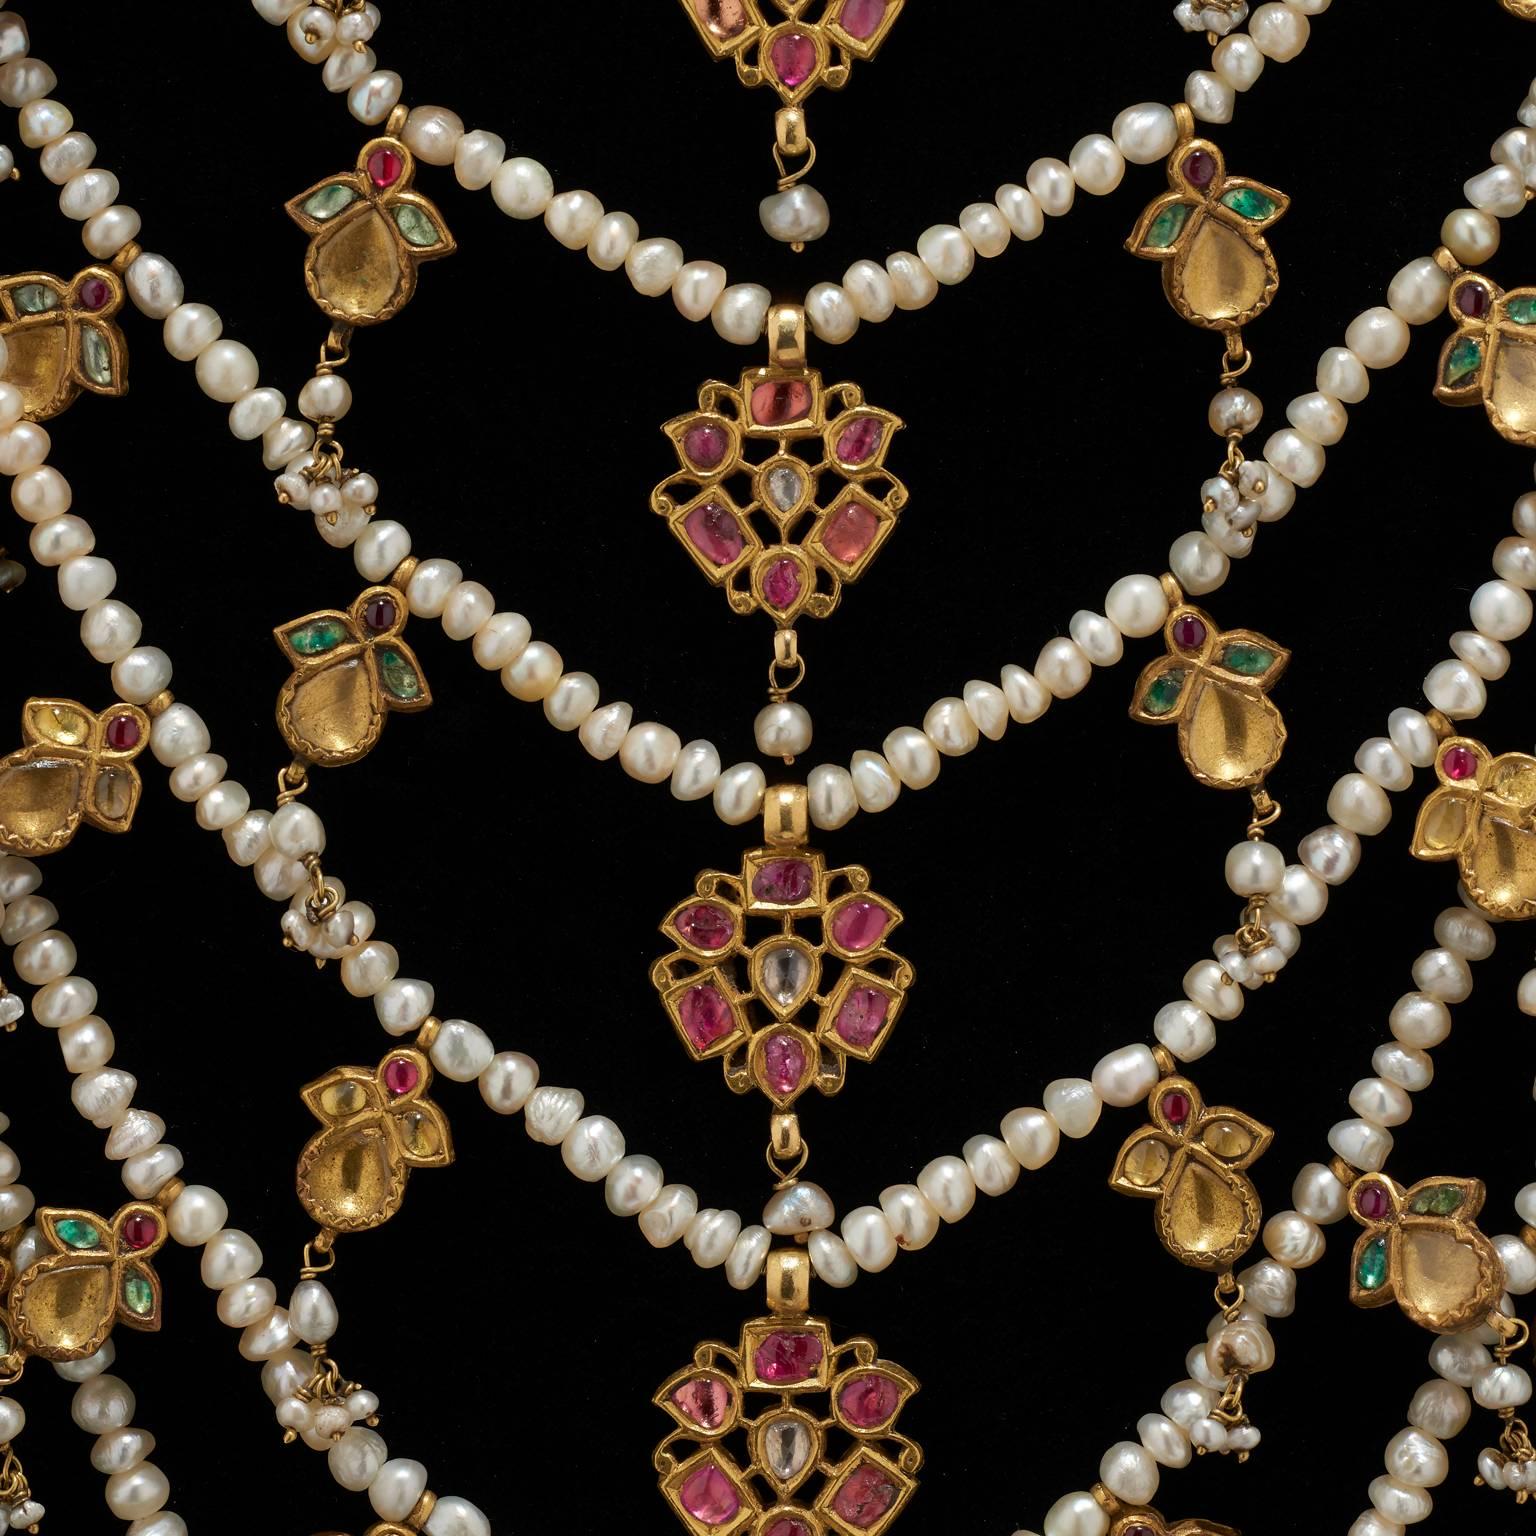 multi-strand necklaces with pearls and precious stones